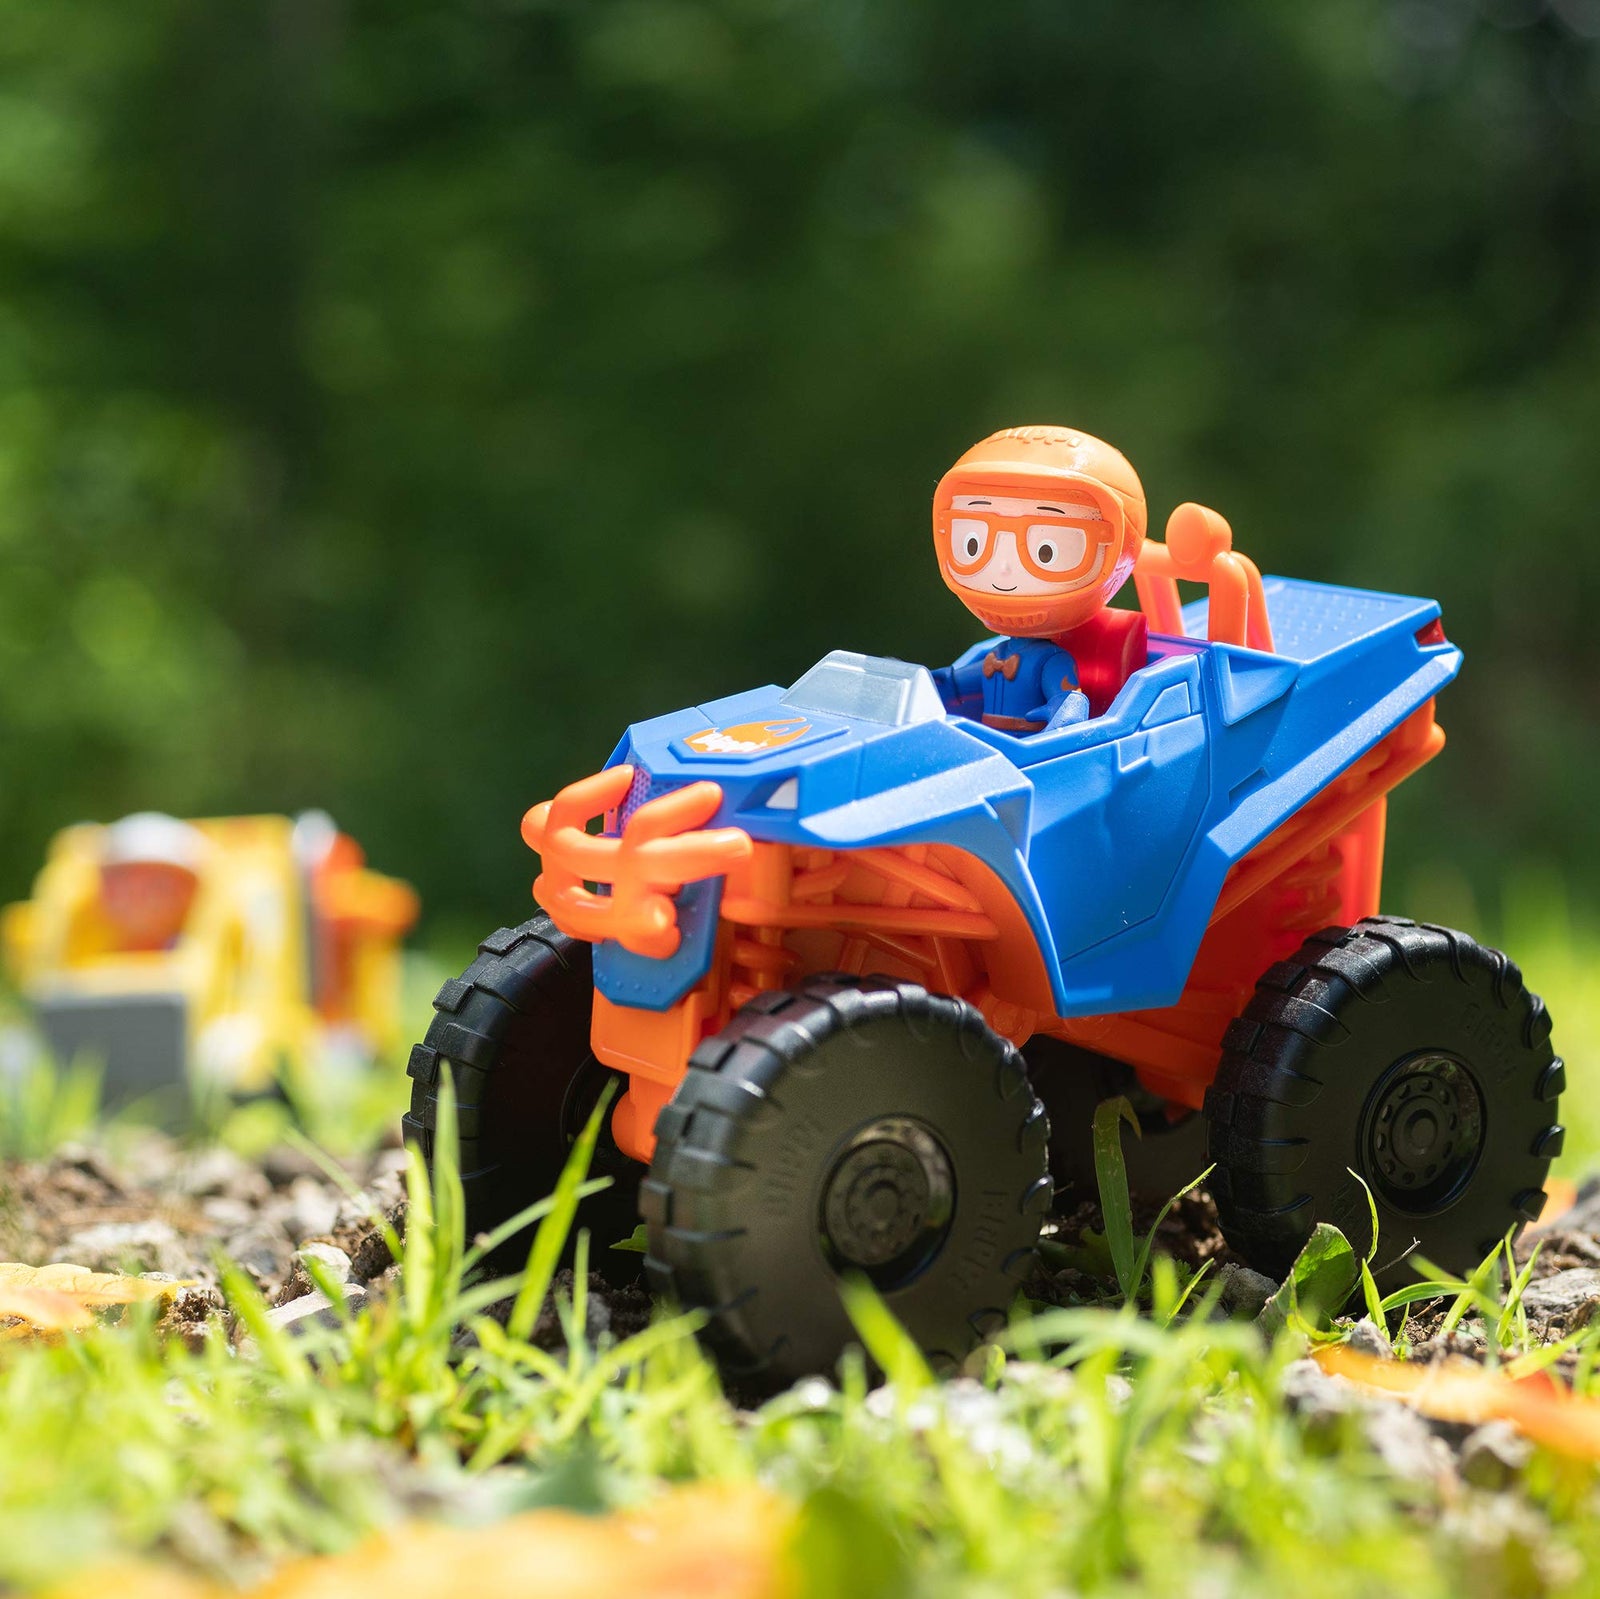 Blippi Monster Truck Mobile - Mini Vehicle with Freewheeling Features Including 2” Character Toy Figure and Cool Hydraulics - Imaginative Play for Toddlers and Young Children